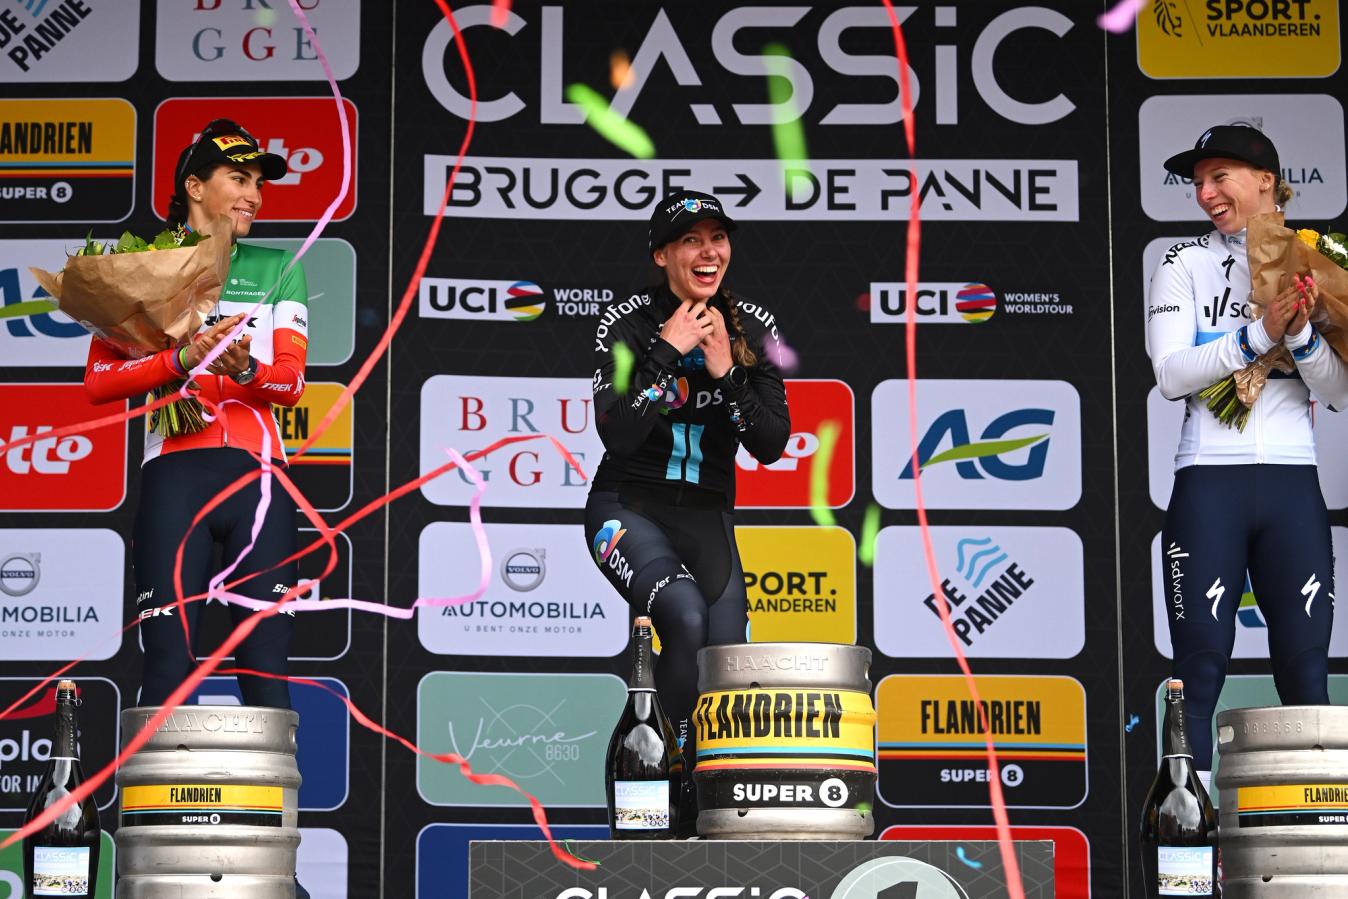 Pfeiffer Georgi consistently finished in the top 10 at the Classics